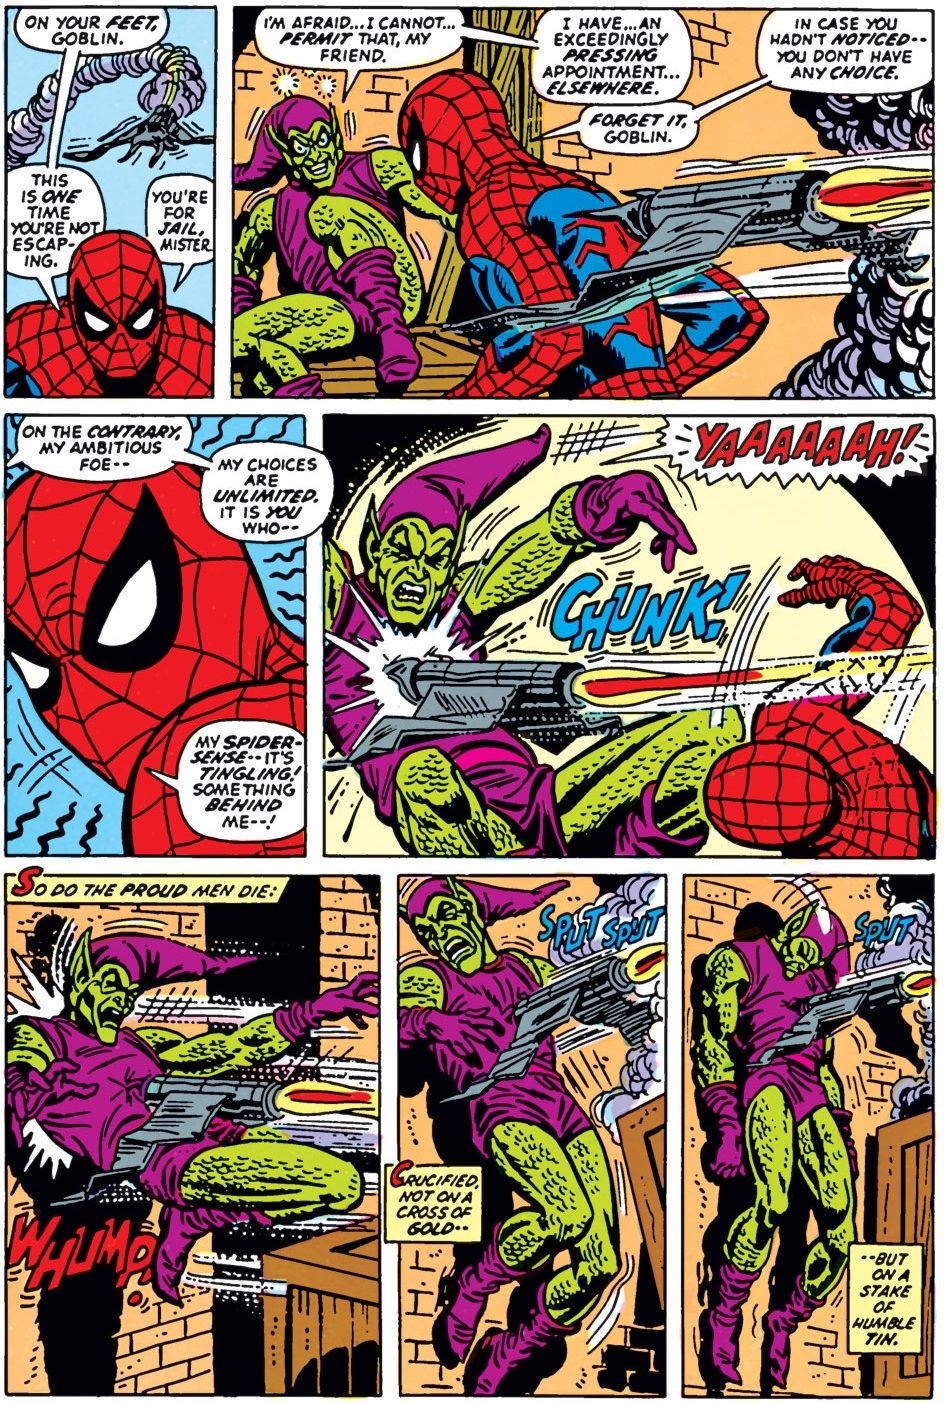 The Green Goblin is killed